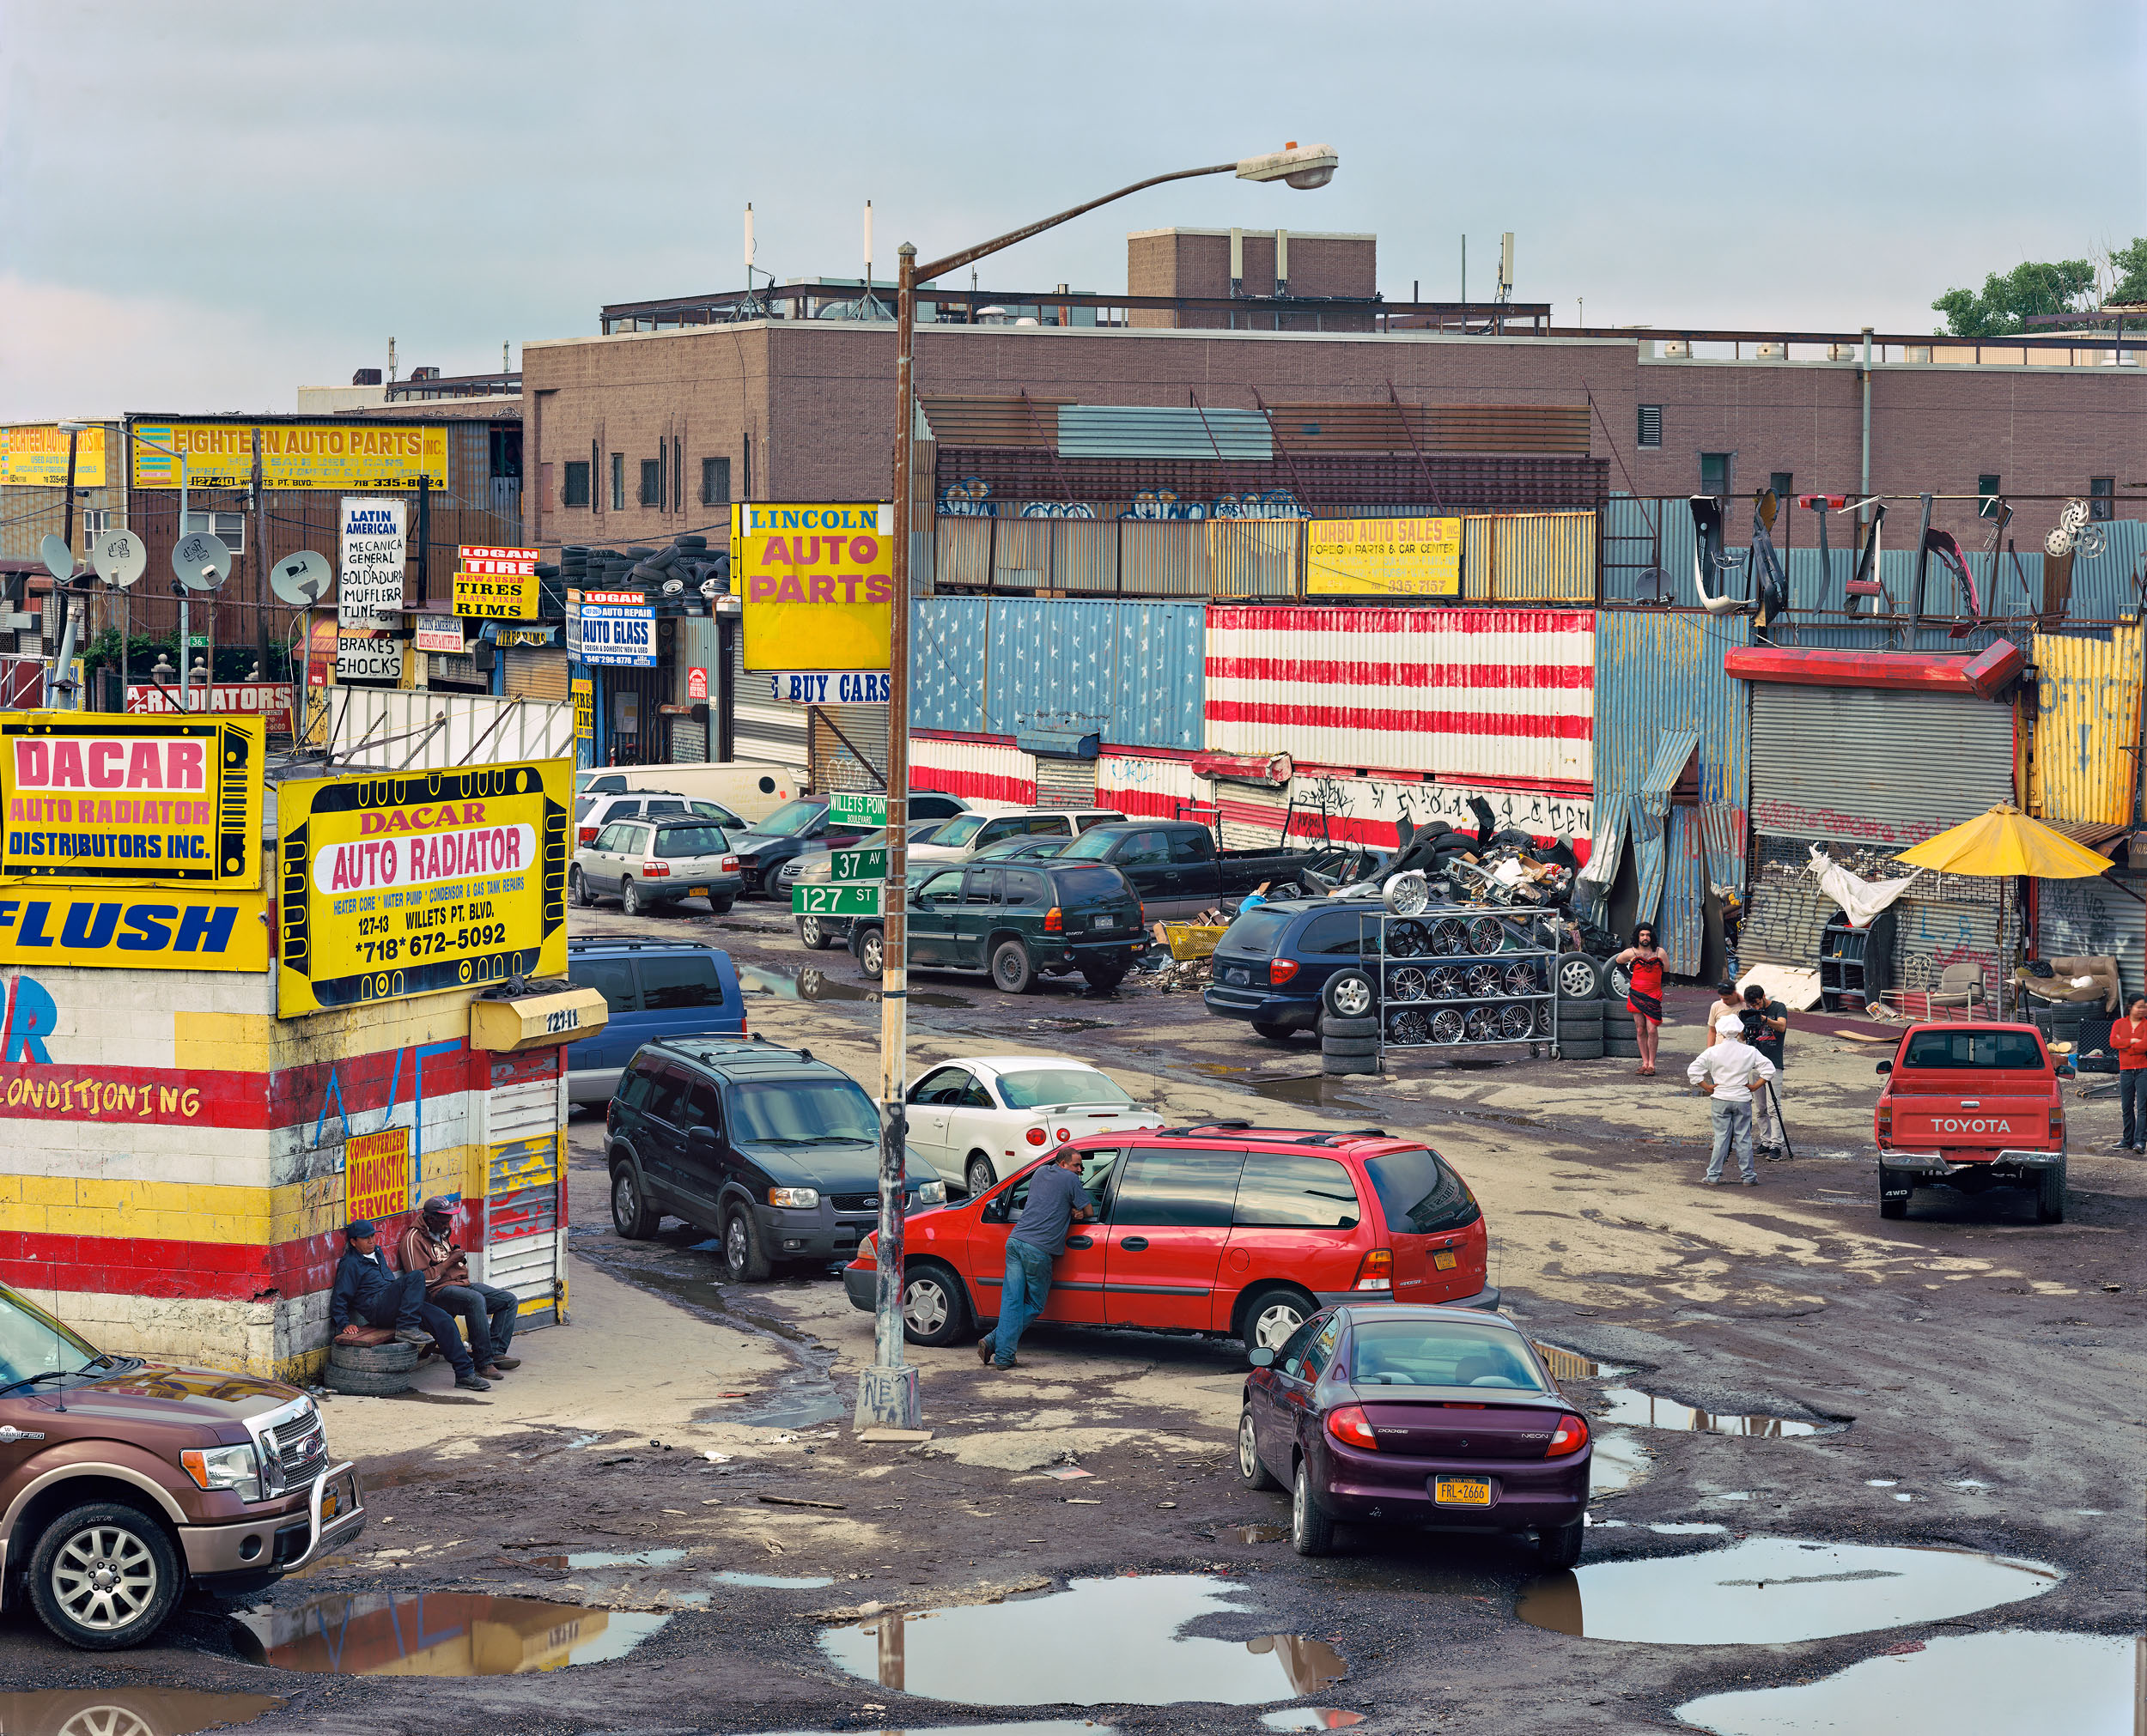 Bearded Lady, Willets Point, New York